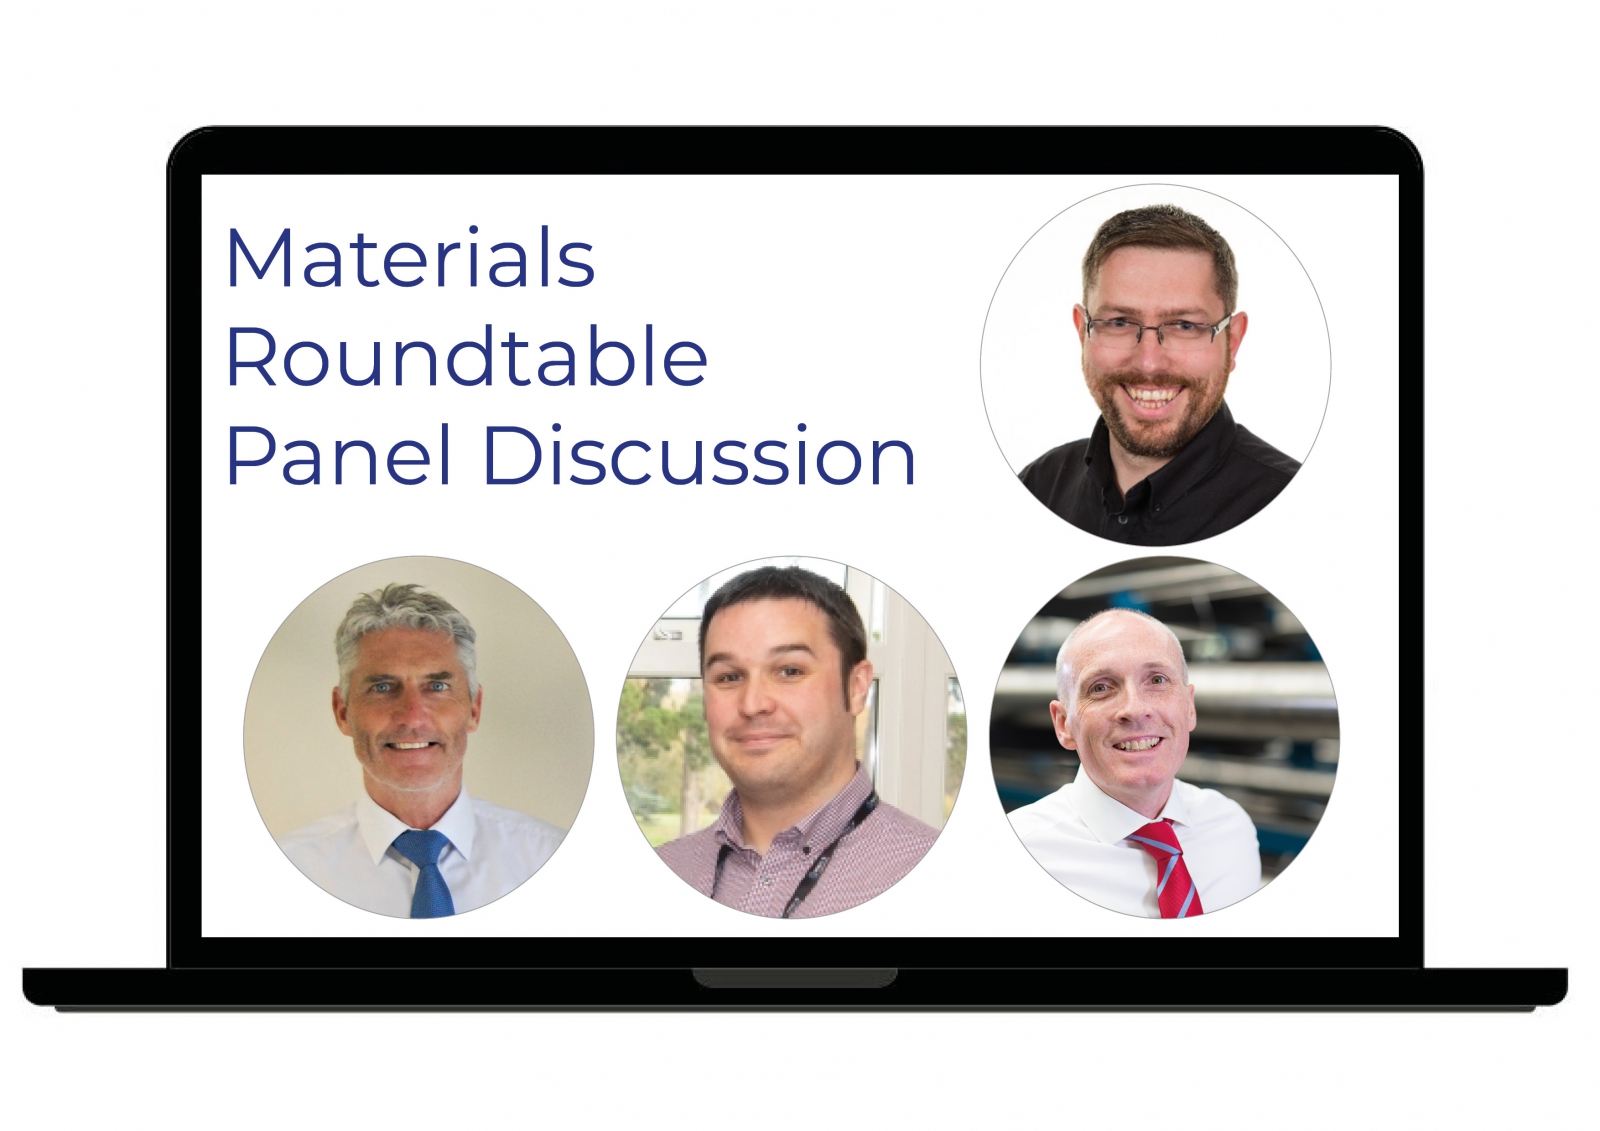 Materials Roundtable Panel Discussion